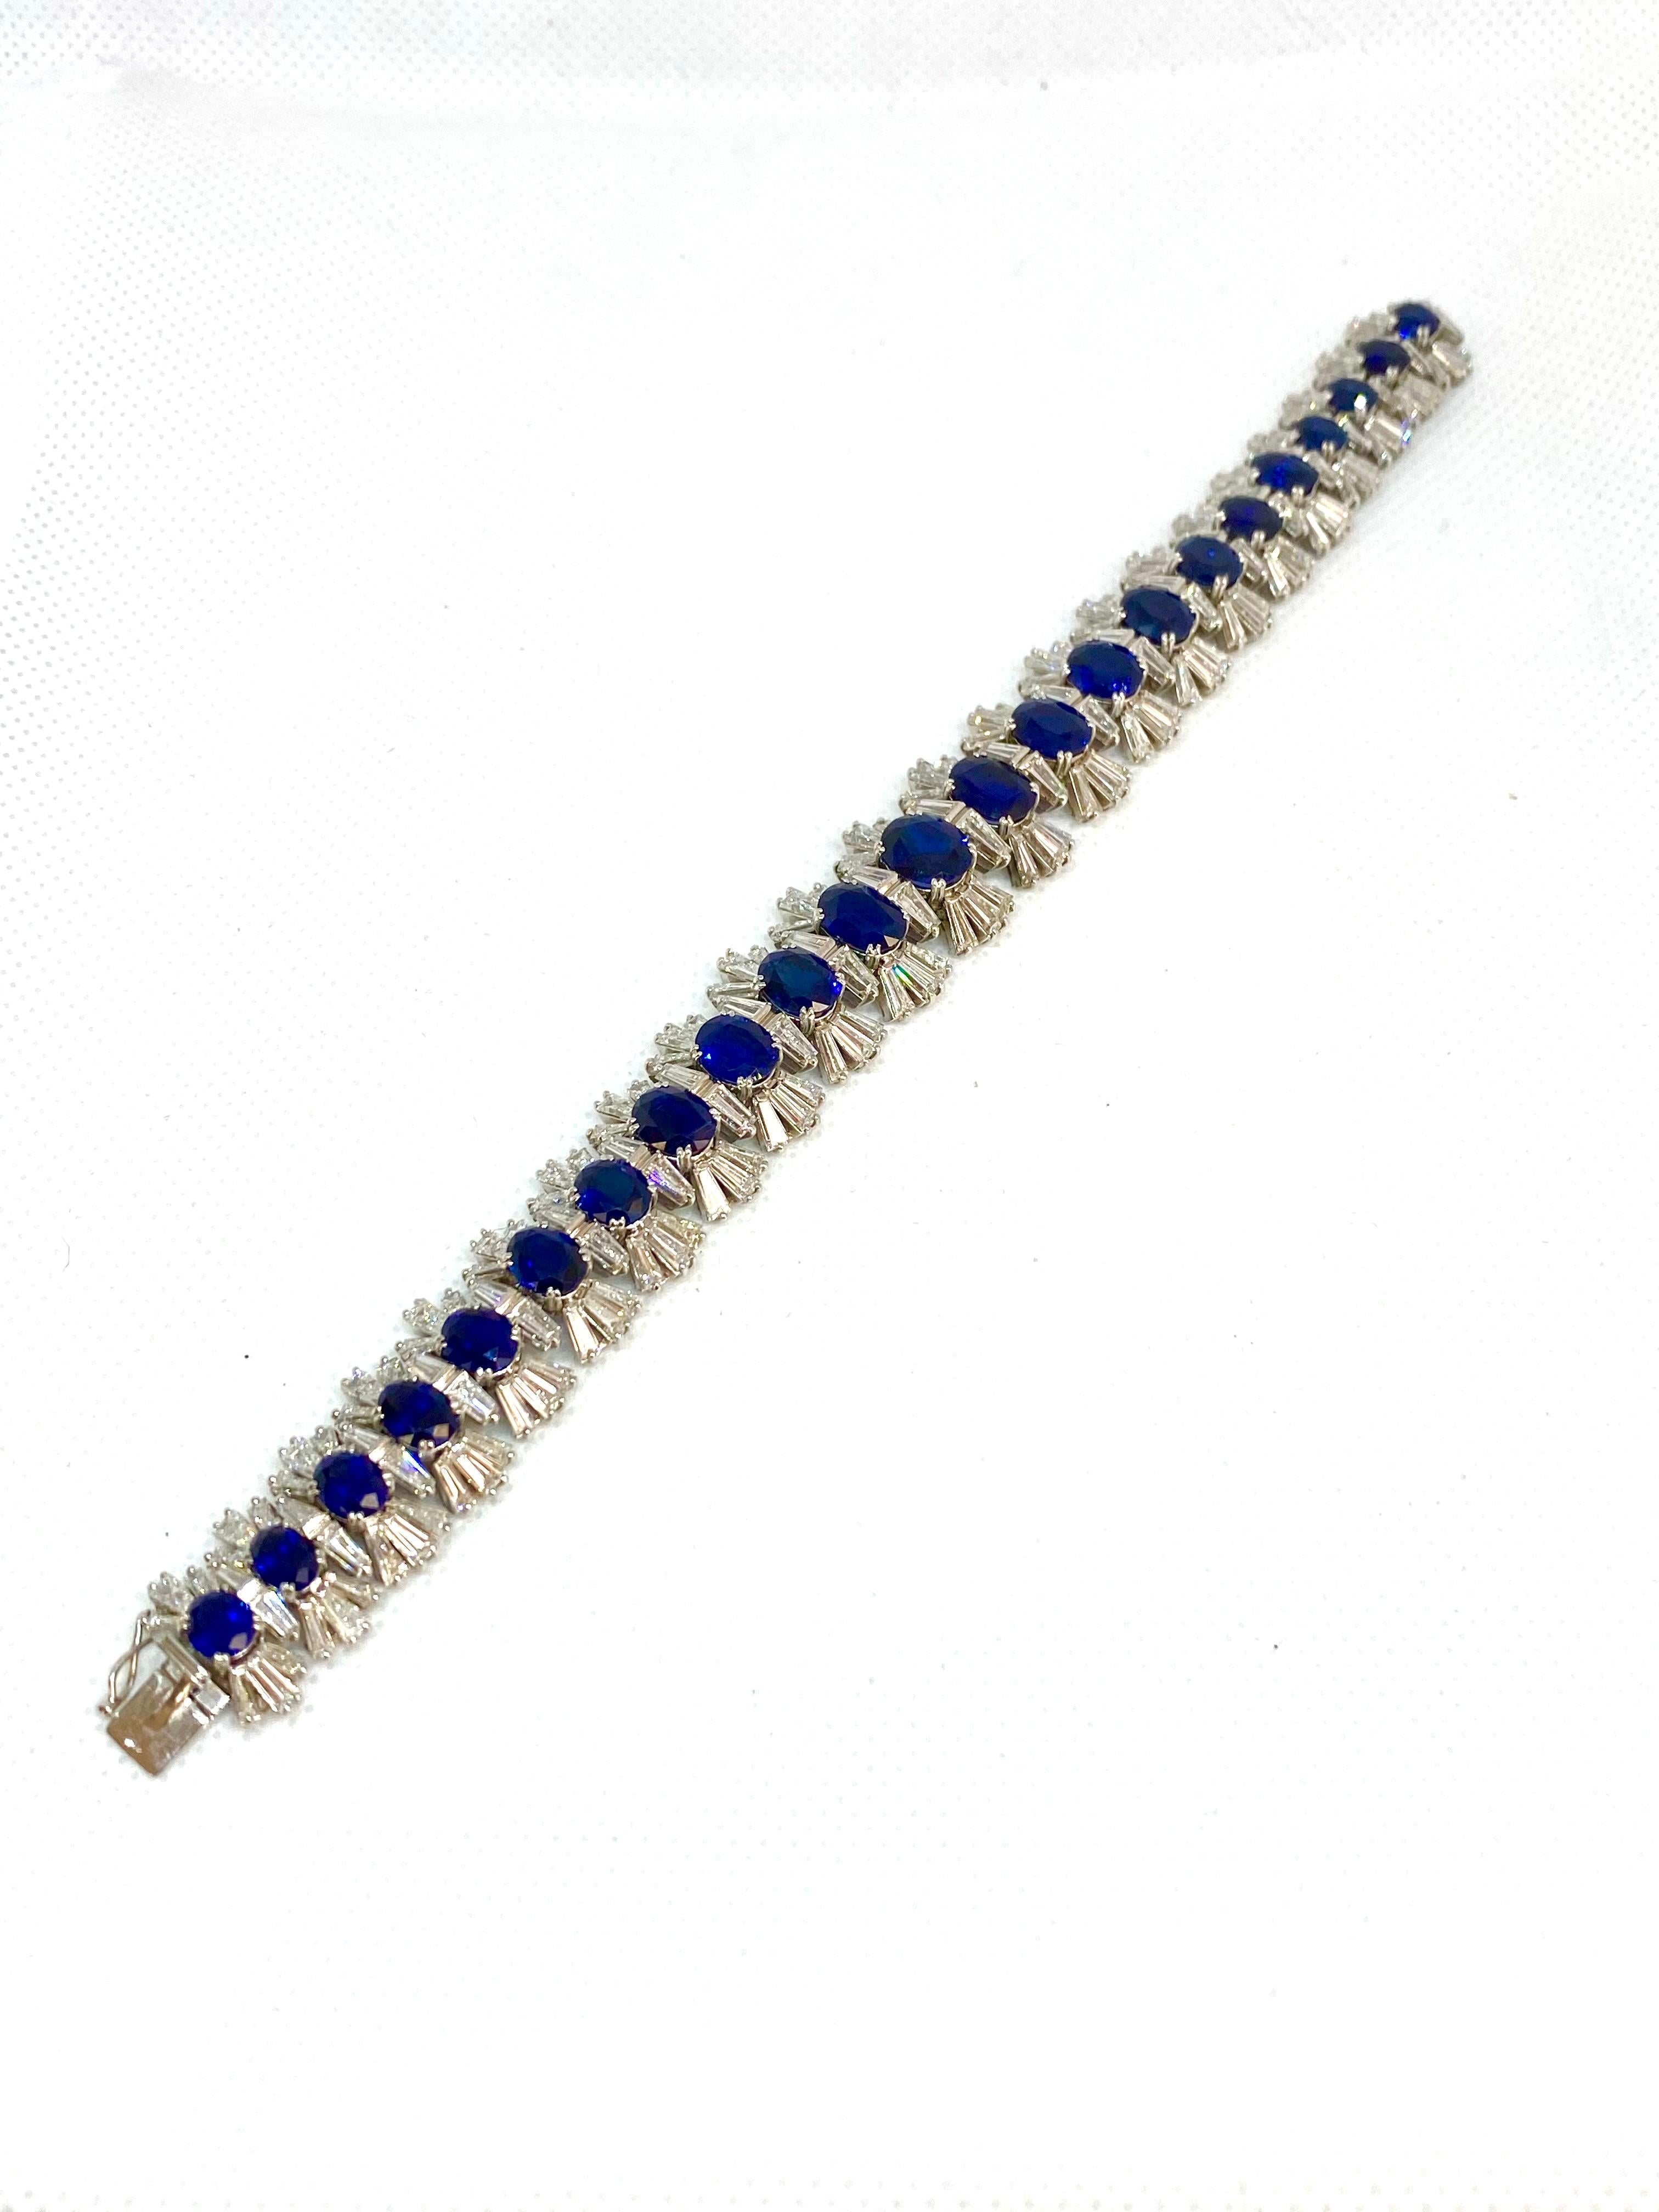 Platinum, sapphires and diamonds.
23 oval cut blue sapphires, degrading from center to sides. Total weight ct. +/- 24,5
180 tapered cut diamonds, H color, degrading from center to sides. Total weight ct. +/- 20,0
Lenght cm 19
Width cm 2,2
Weight